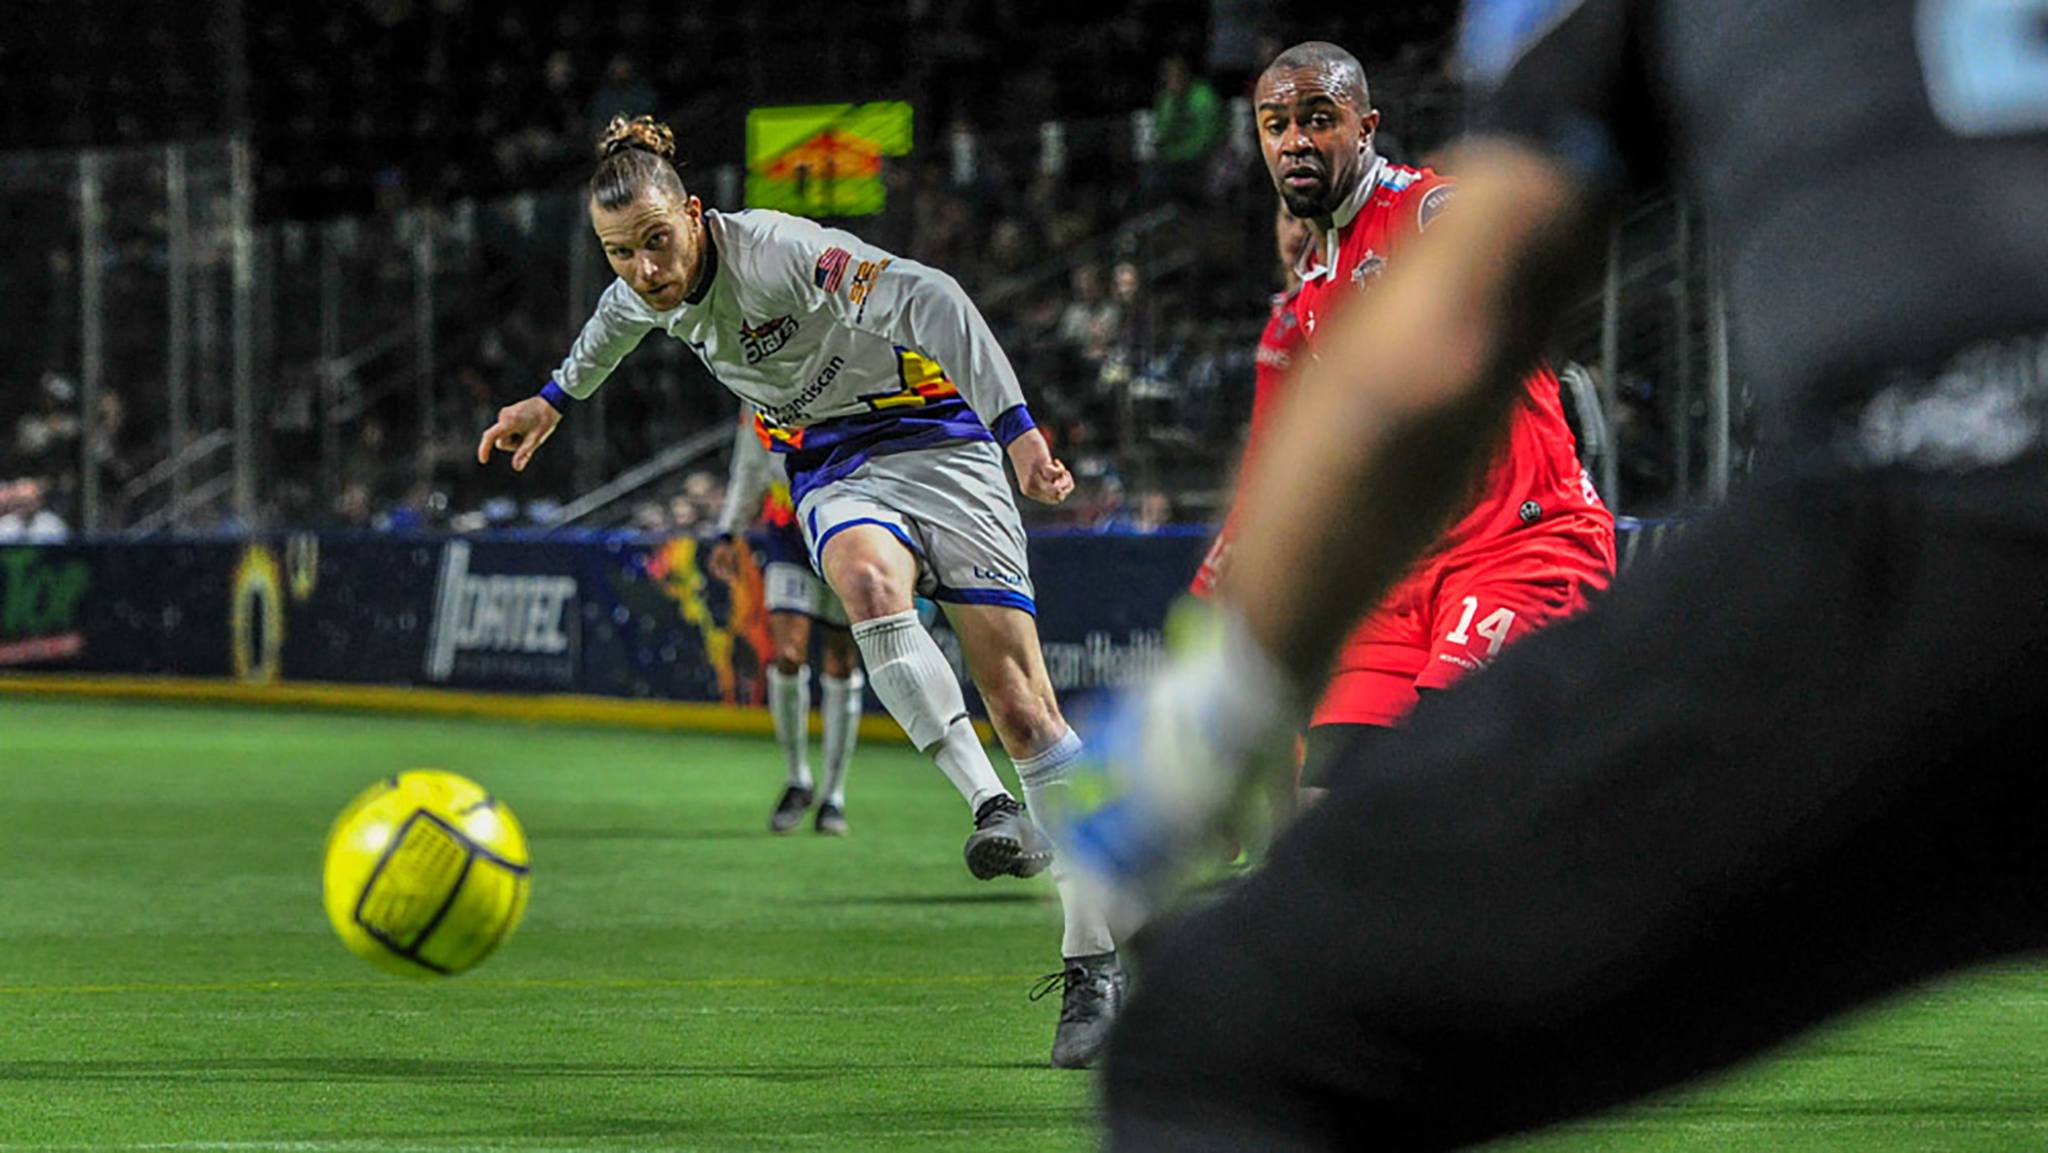 The Stars’ Alex Megson goes on the attack against the Mustangs in MASL action Friday night at the ShoWare Center. Wilson Tsoi/Tacoma Stars